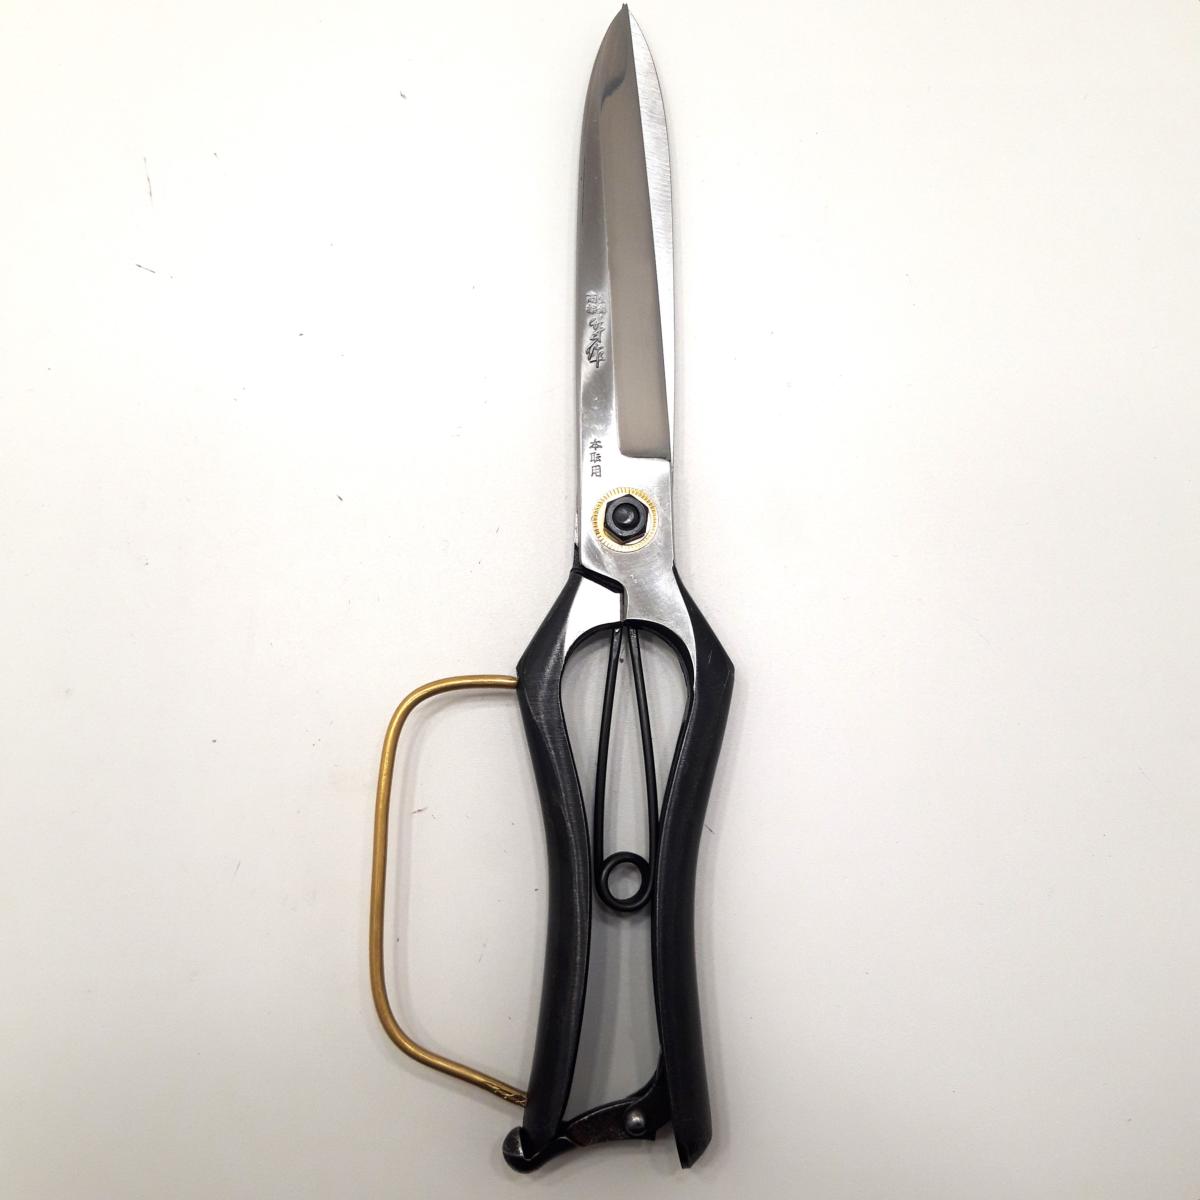 One-handed Japanese shears, TAKEJI brand, wide blades, 270 mm